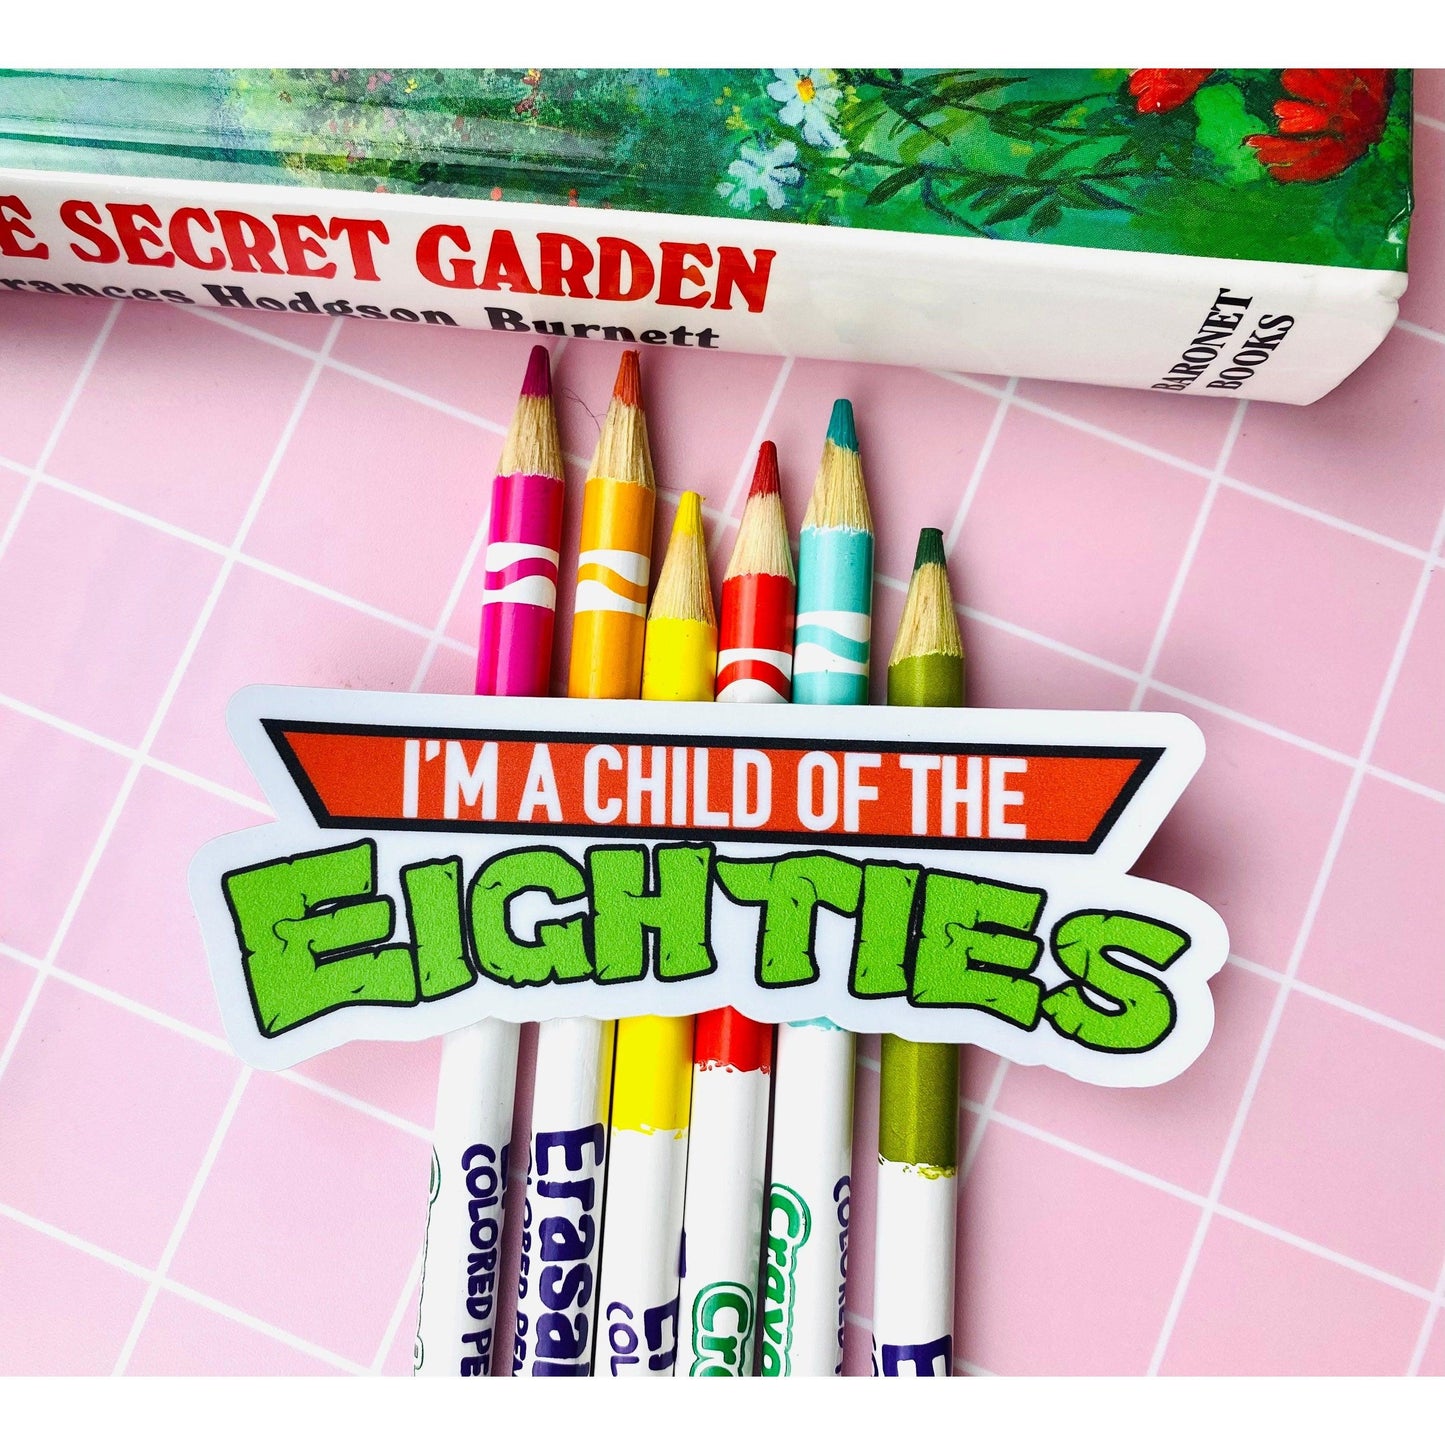 Eighties Kids Sticker 3 Pack including Book It! - Reading Rainbow - Oregon Trail Vintage Designs from 1980s 1990s, Eighties Stickers - Ottos Grotto :: Stickers For Your Stuff